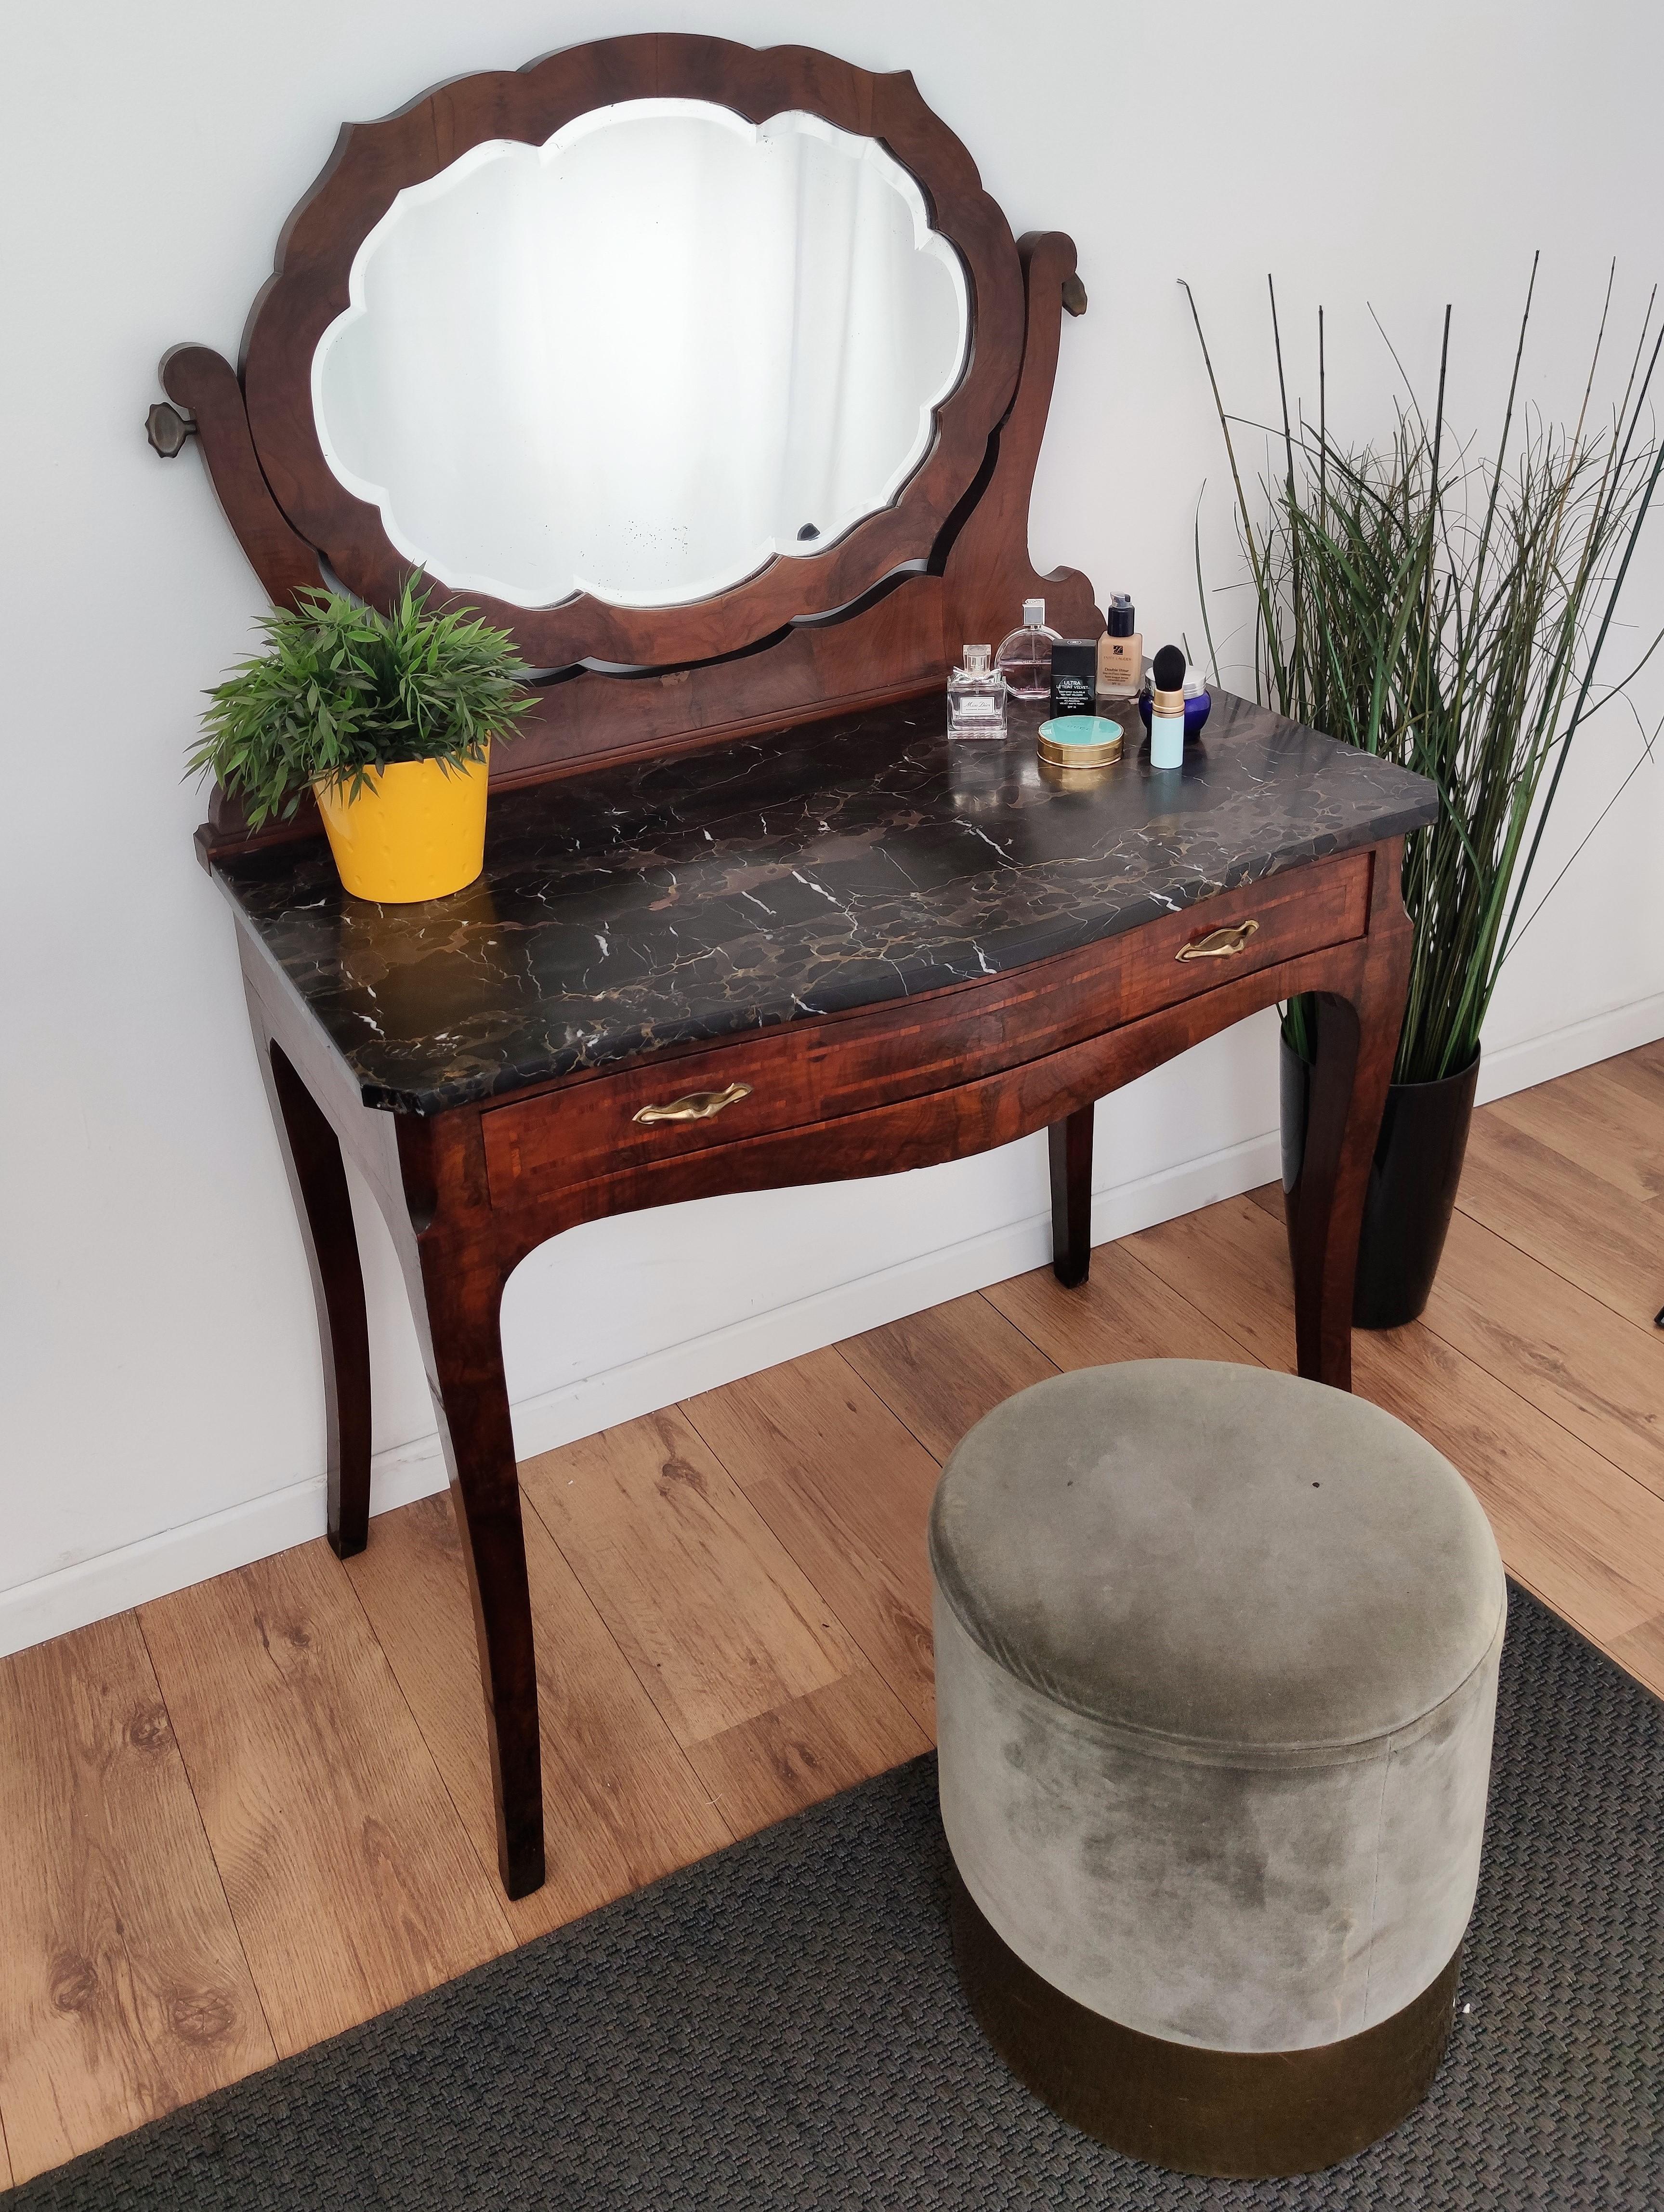 Beautiful Italian Art Deco mid-century vanity or dressing table with amazing Portoro marble top, a cretaceous golden veined black marble from the region of La Spezia, right north of Carrara, and a beautifully shaped, tilting and beveled, mirror. The